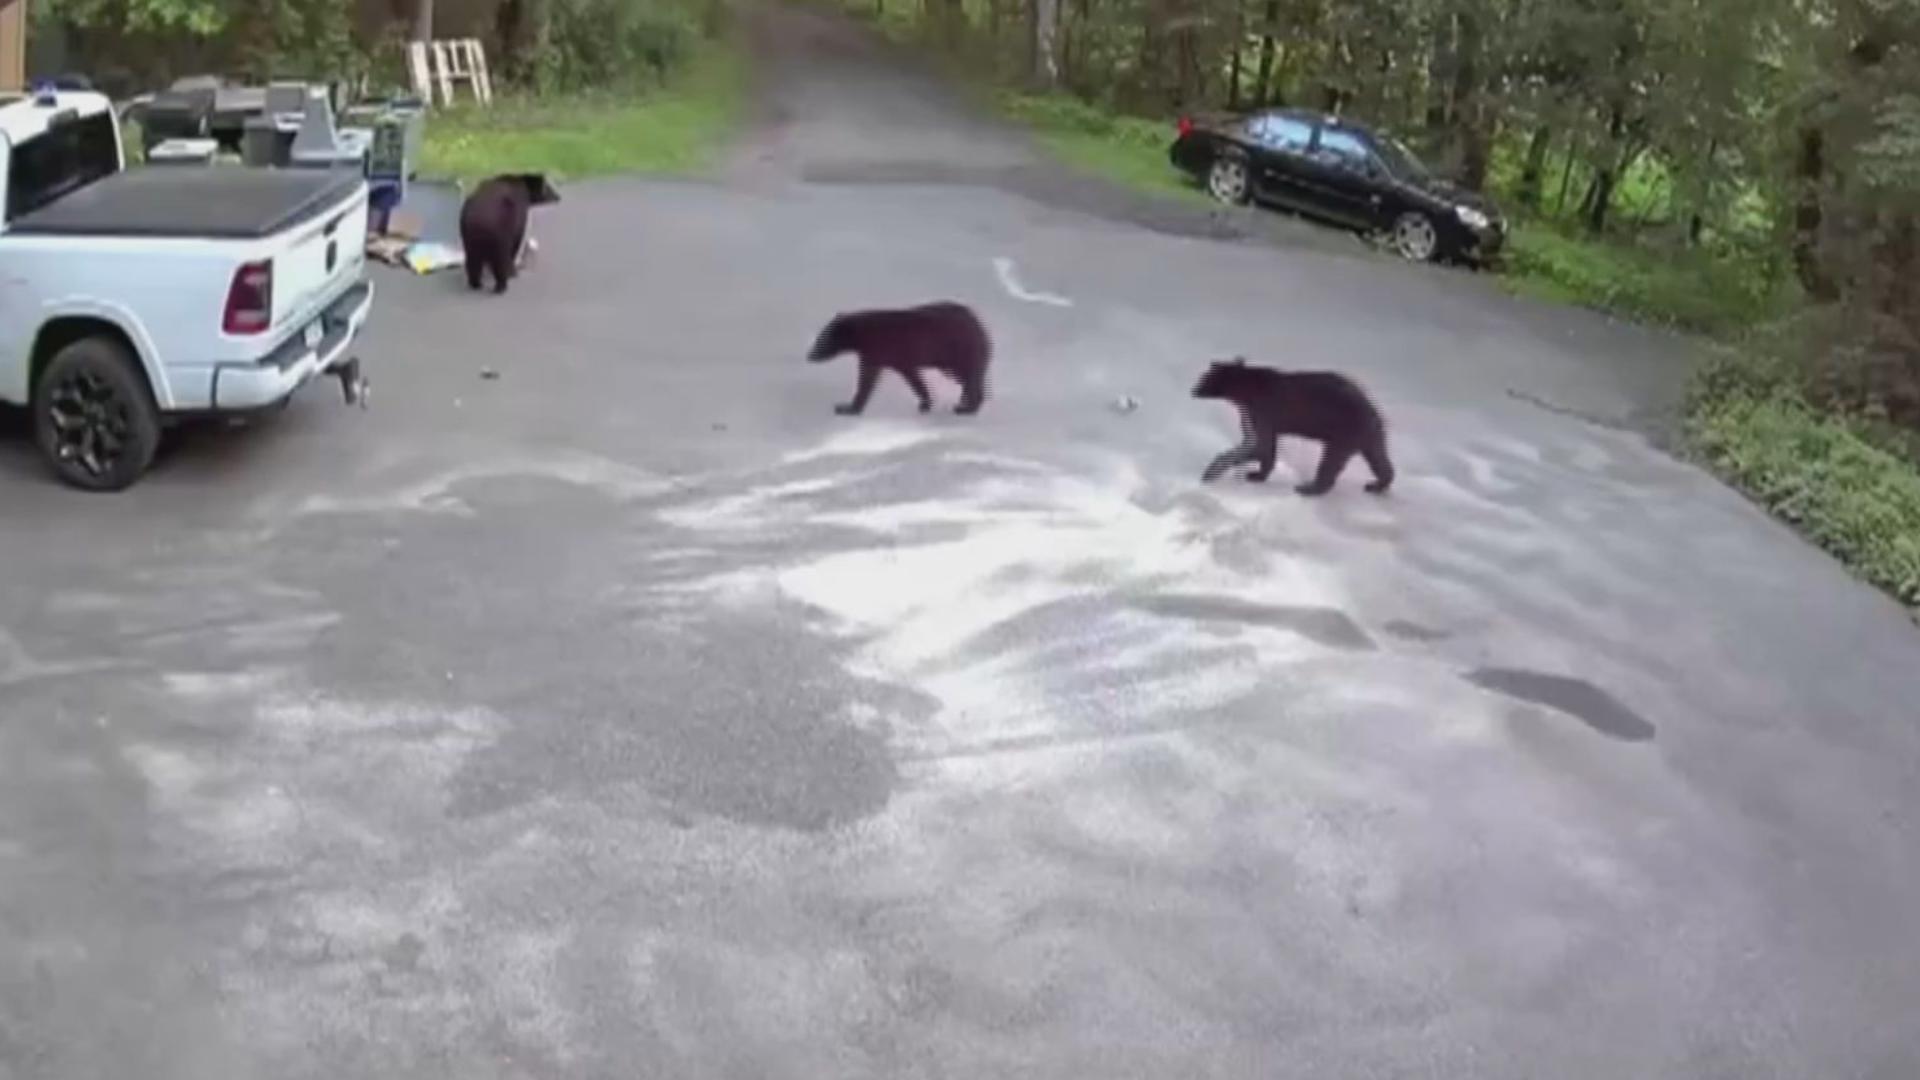 Bailey Jacobsen and her pal Zeus encountered the mama bear and her cubs right outside the front door by her garbage can, and that's when things got hairy.